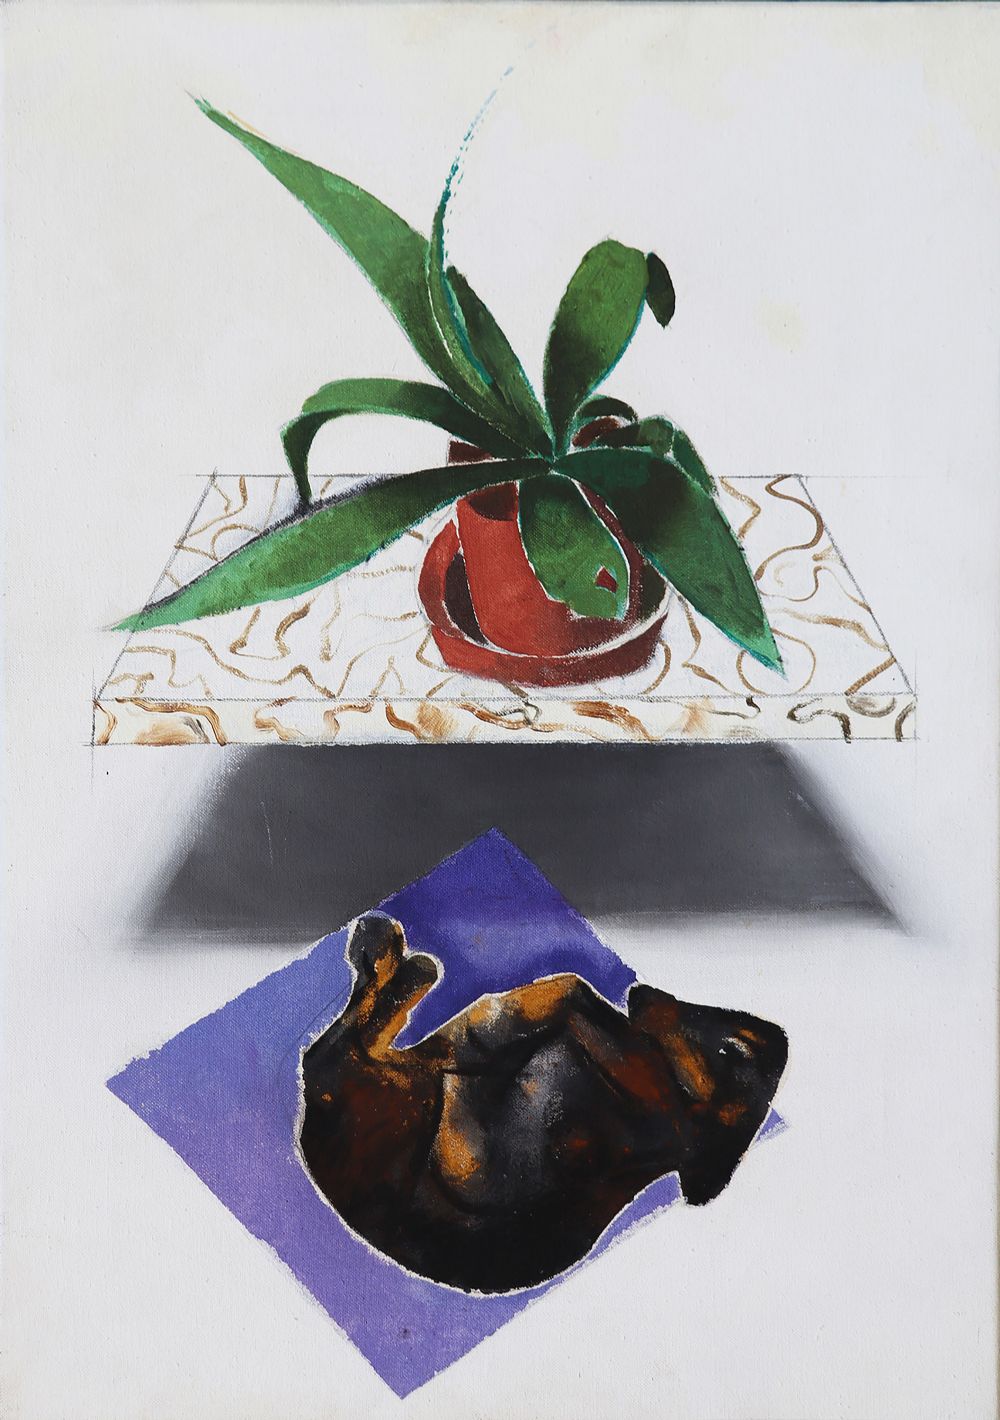 GIUSEPPI MY DOG WITH A PLANT by Micheal Farrell  at deVeres Auctions